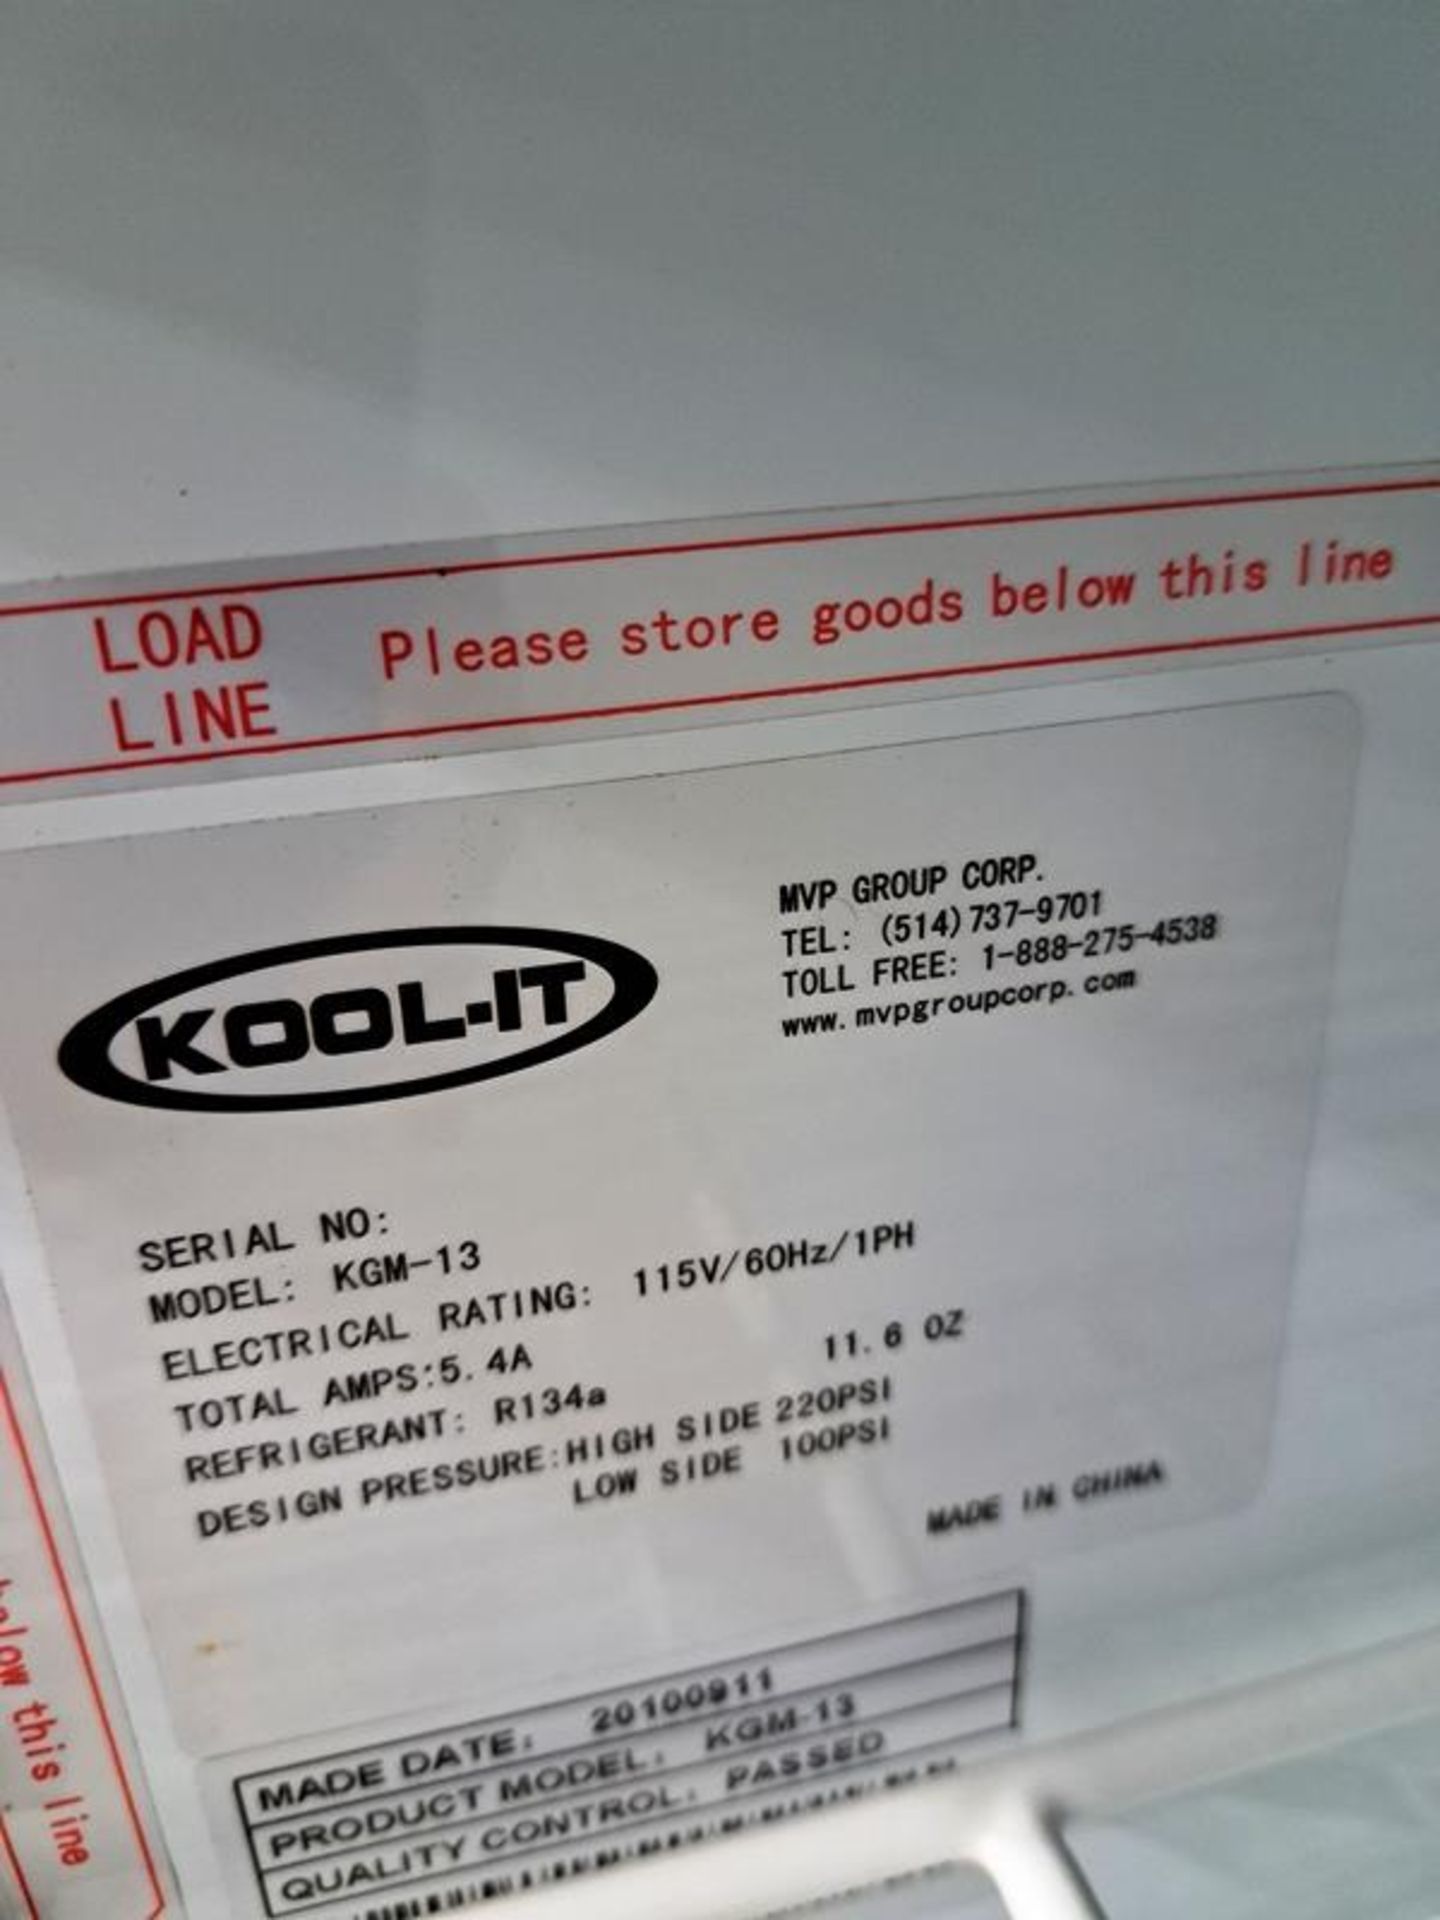 Kool-It Mdl. KGM13 Glass Front Refrigerator, 115 volts (Required Loading Fee: $25.00) NO HAND - Image 4 of 4